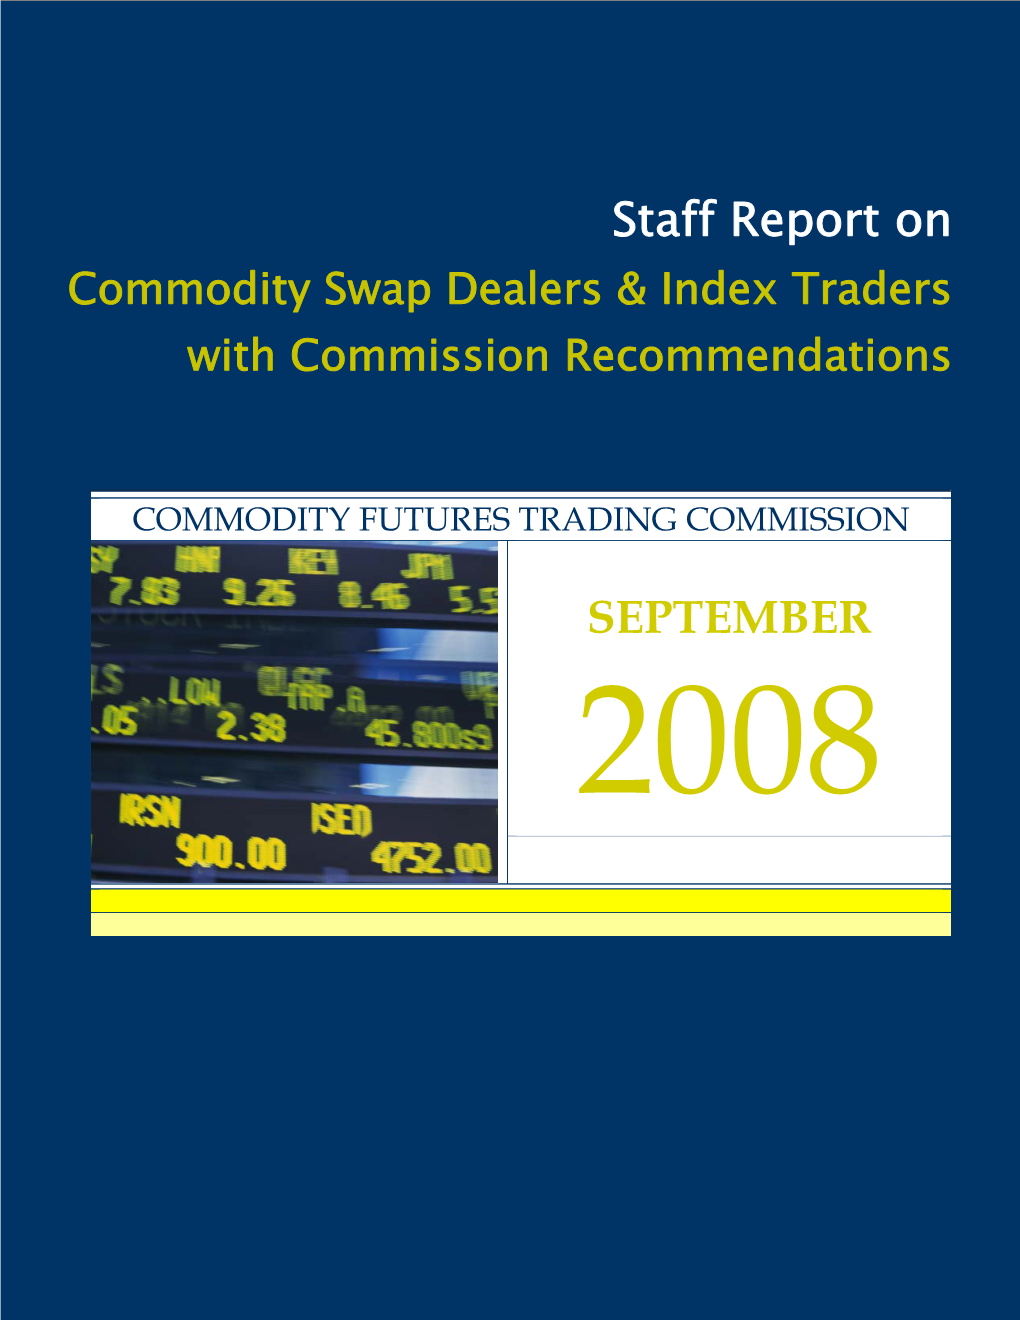 CFTC Staff Report on Commodity Swap Dealers and Index Traders